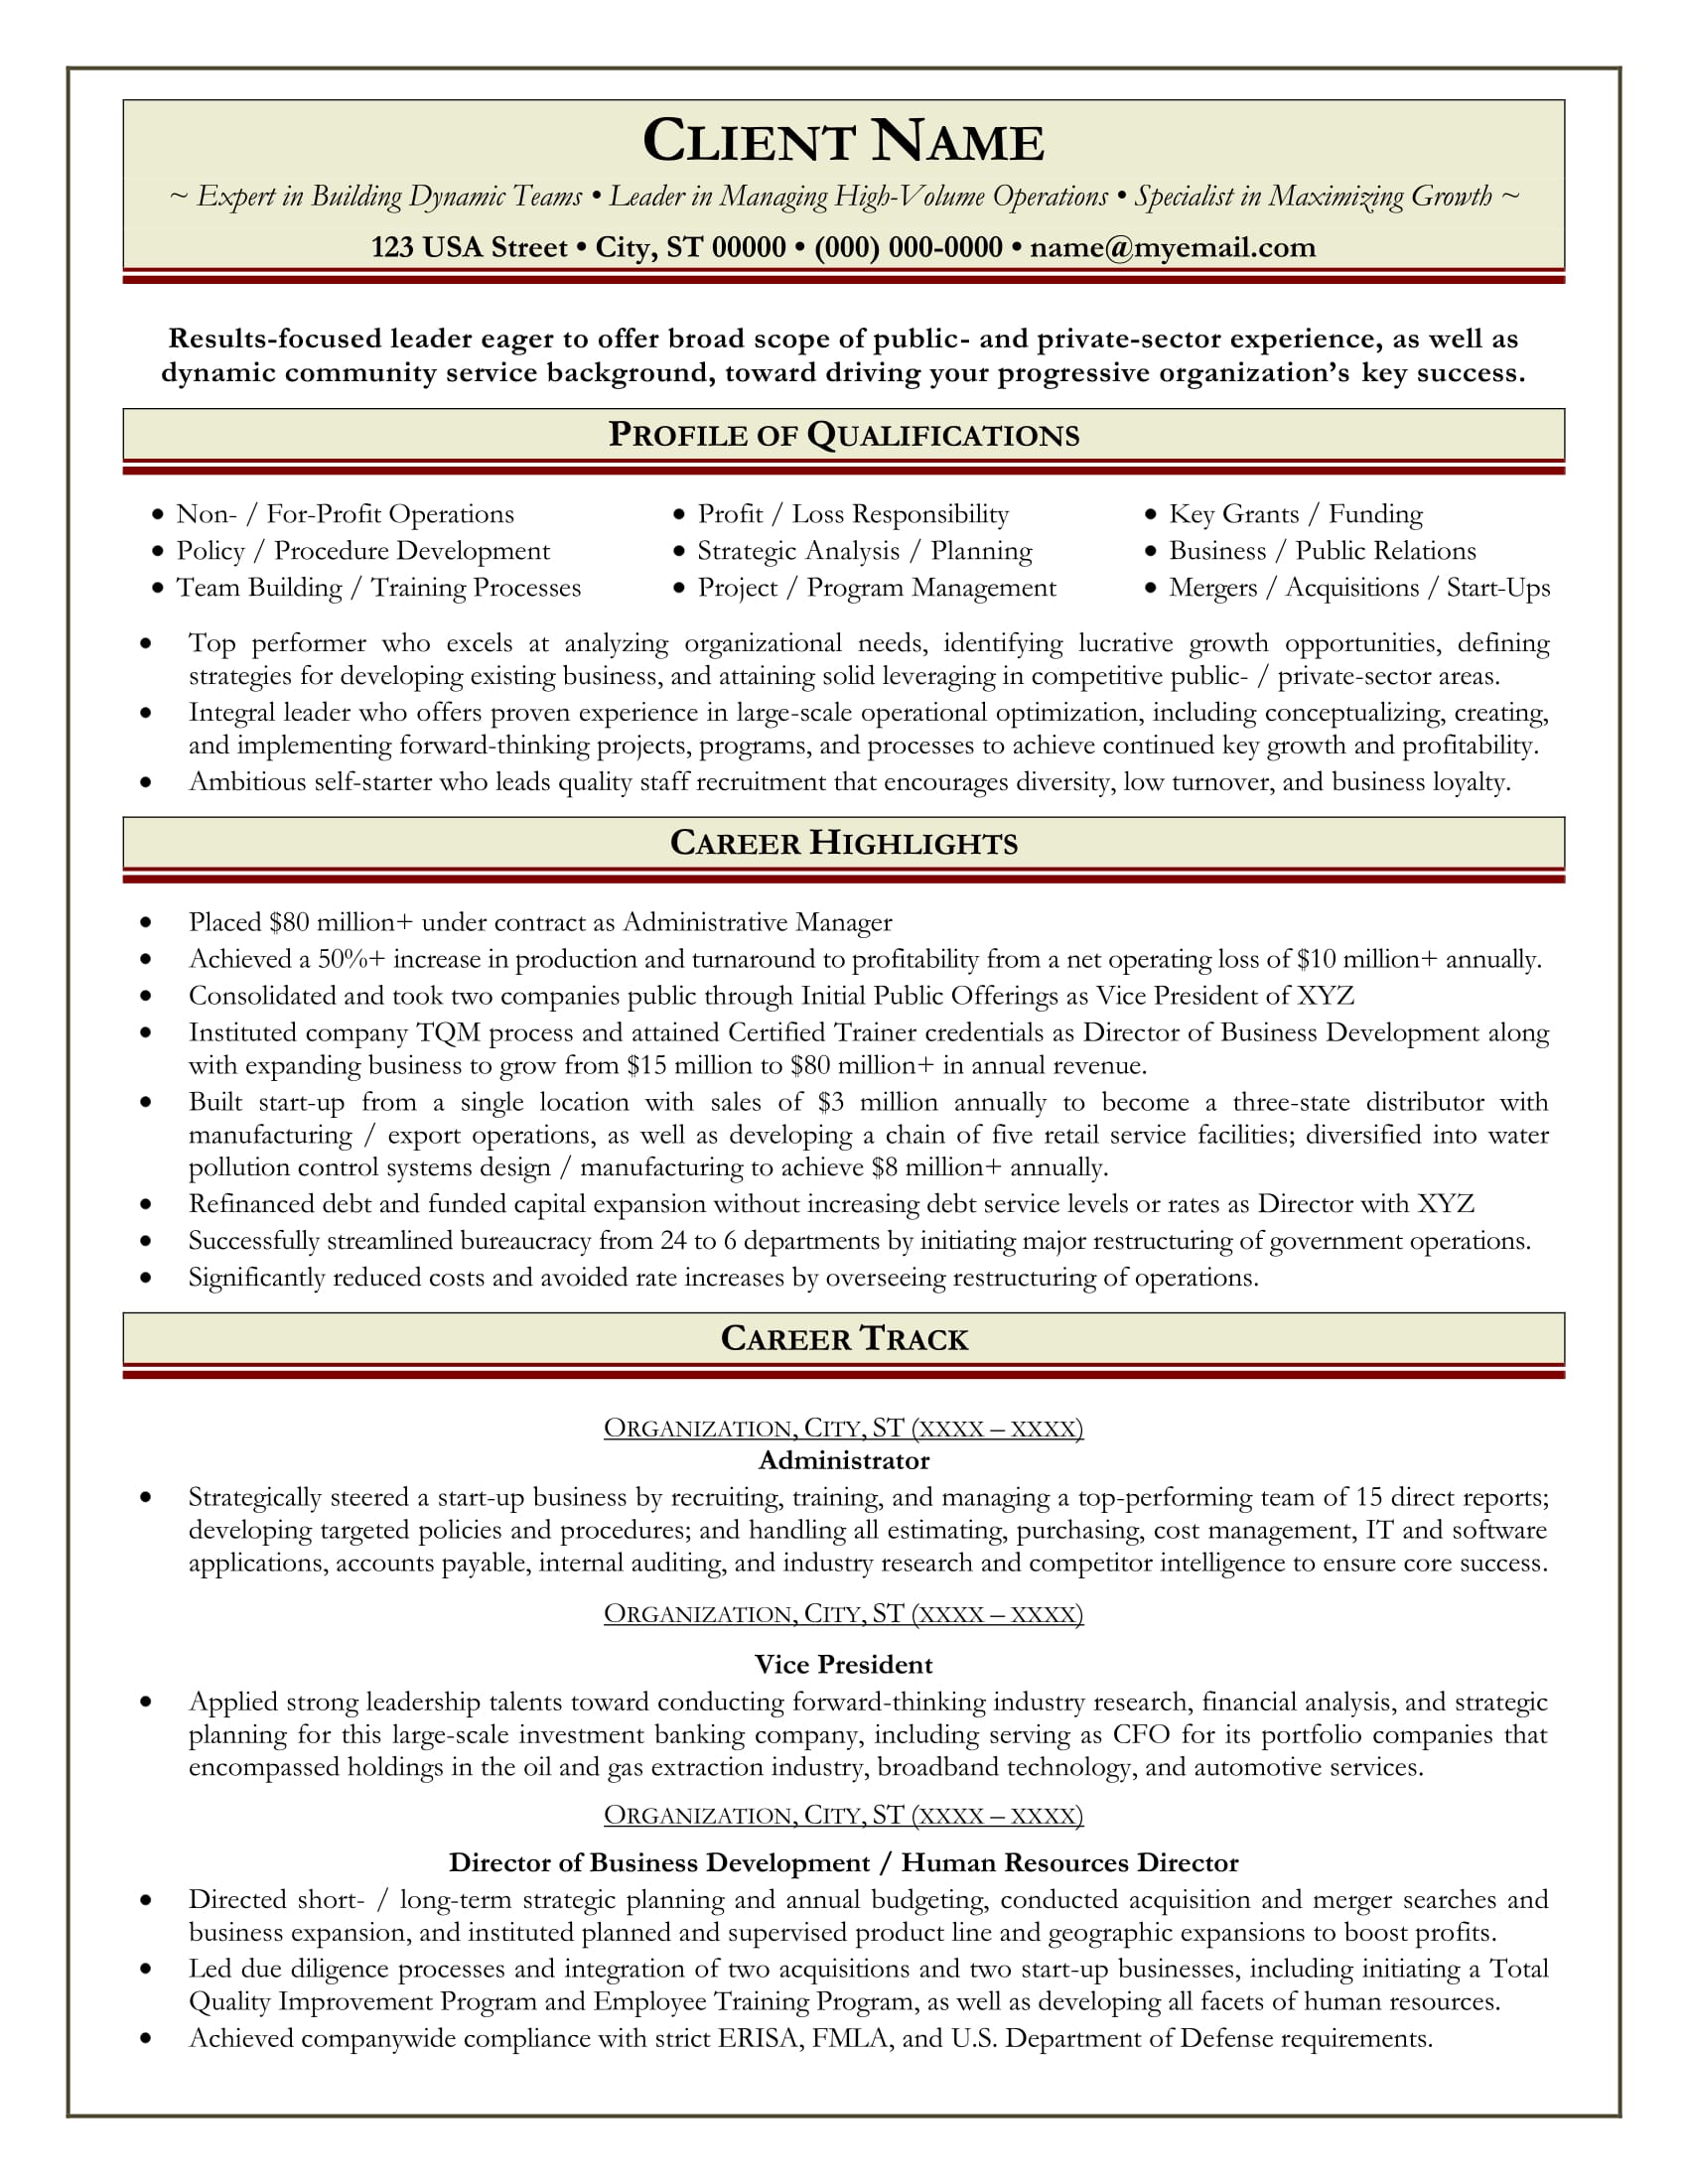 an example of a resume